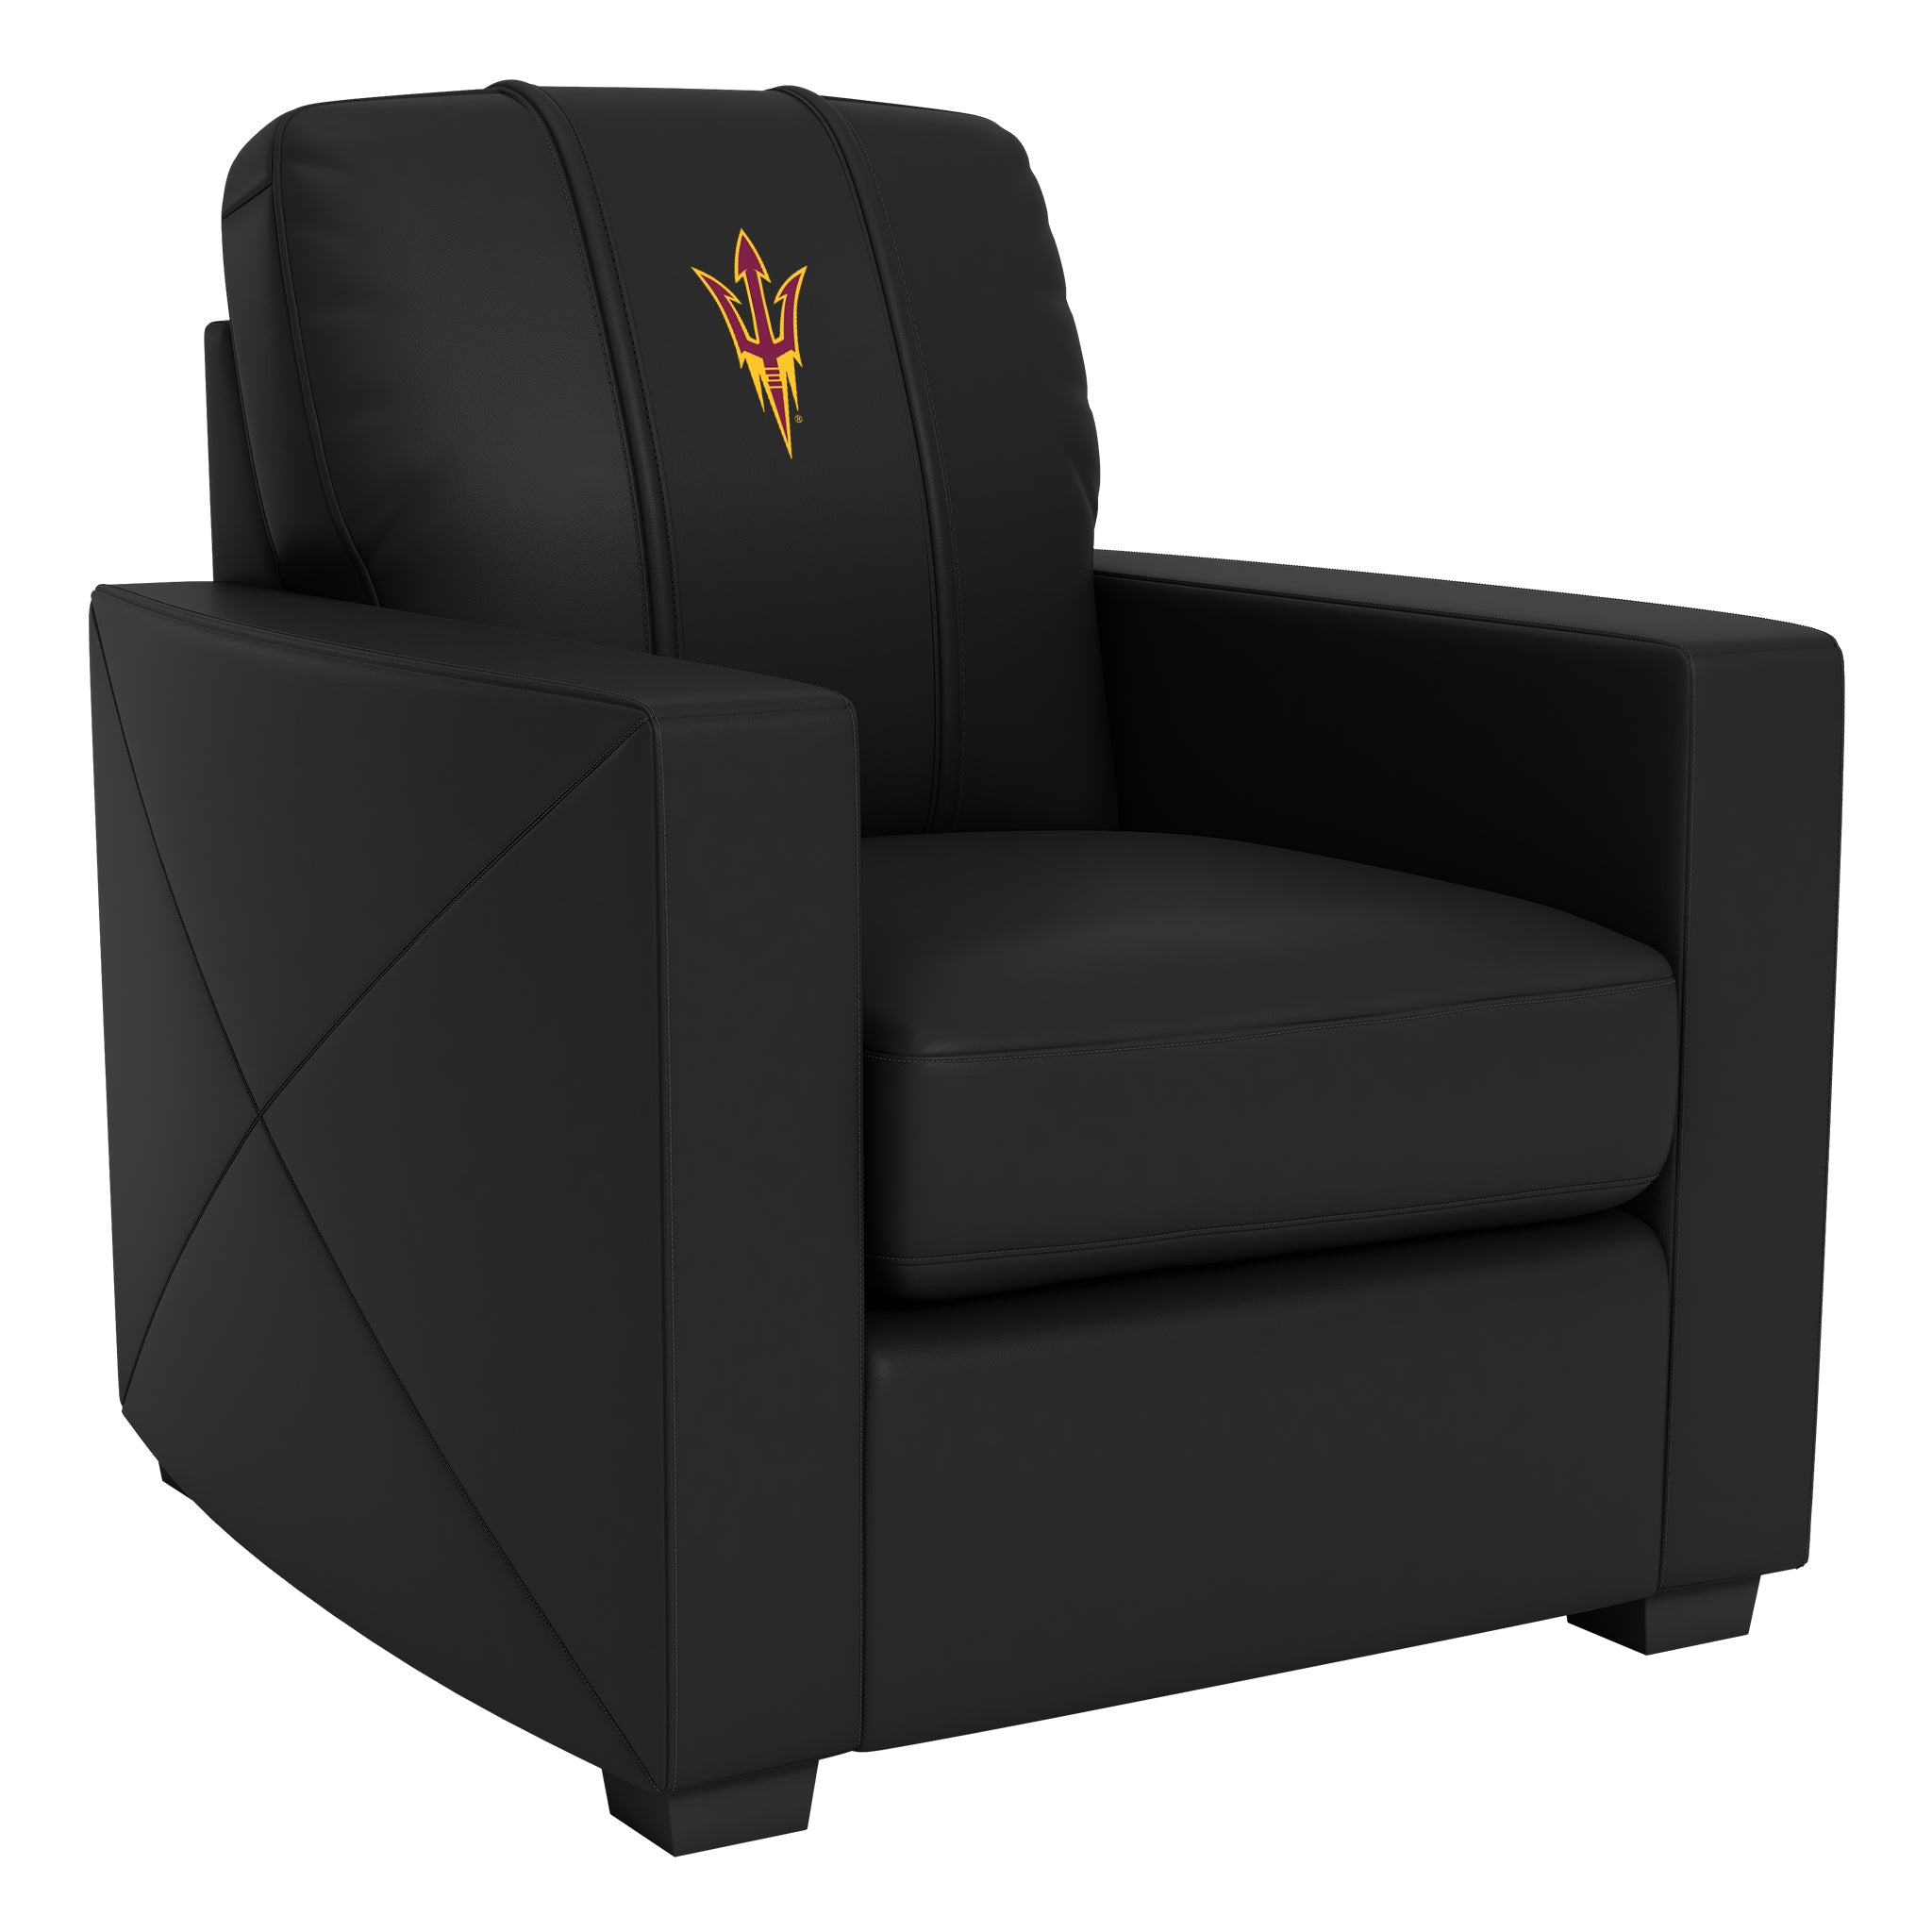 Arizona State Sundevils Silver Club Chair with Arizona State Sundevils Logo